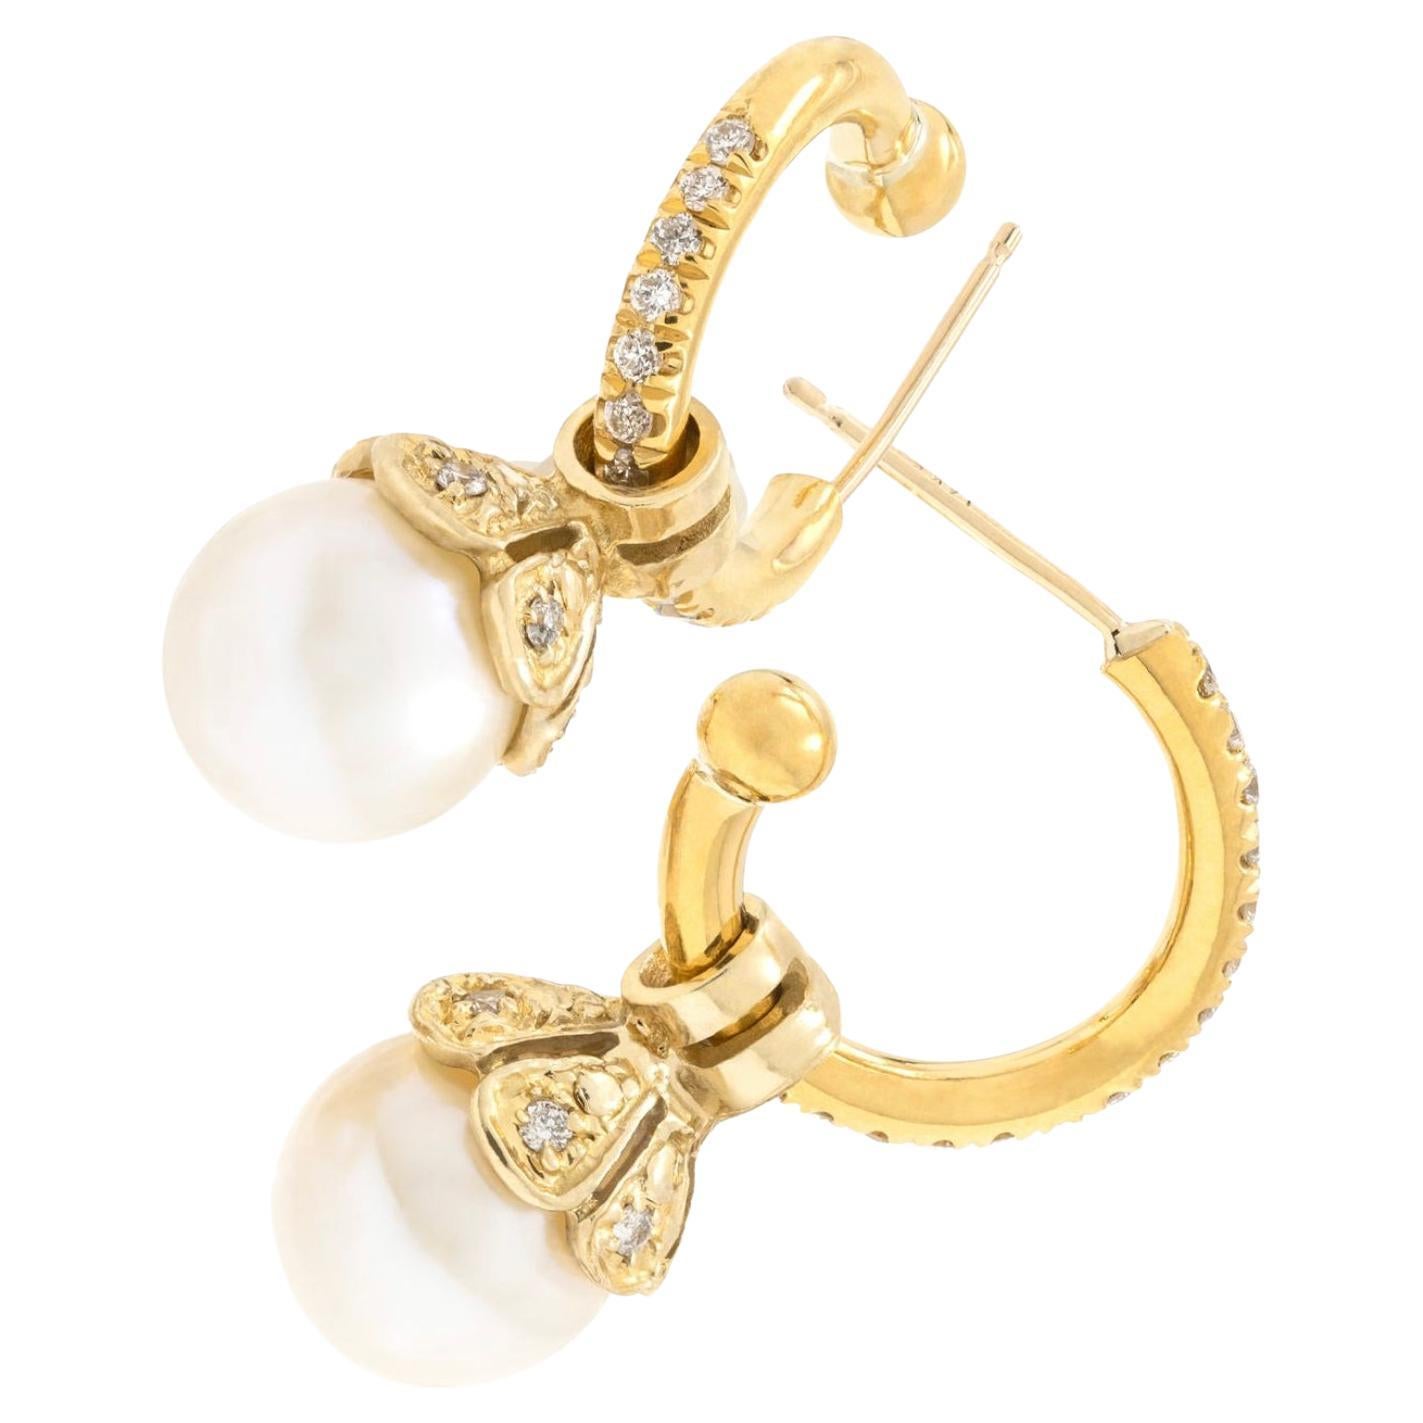 Paris & Lily, 22k Gold, Diamond Hoop Earrings with Removable Pearl Pendants For Sale